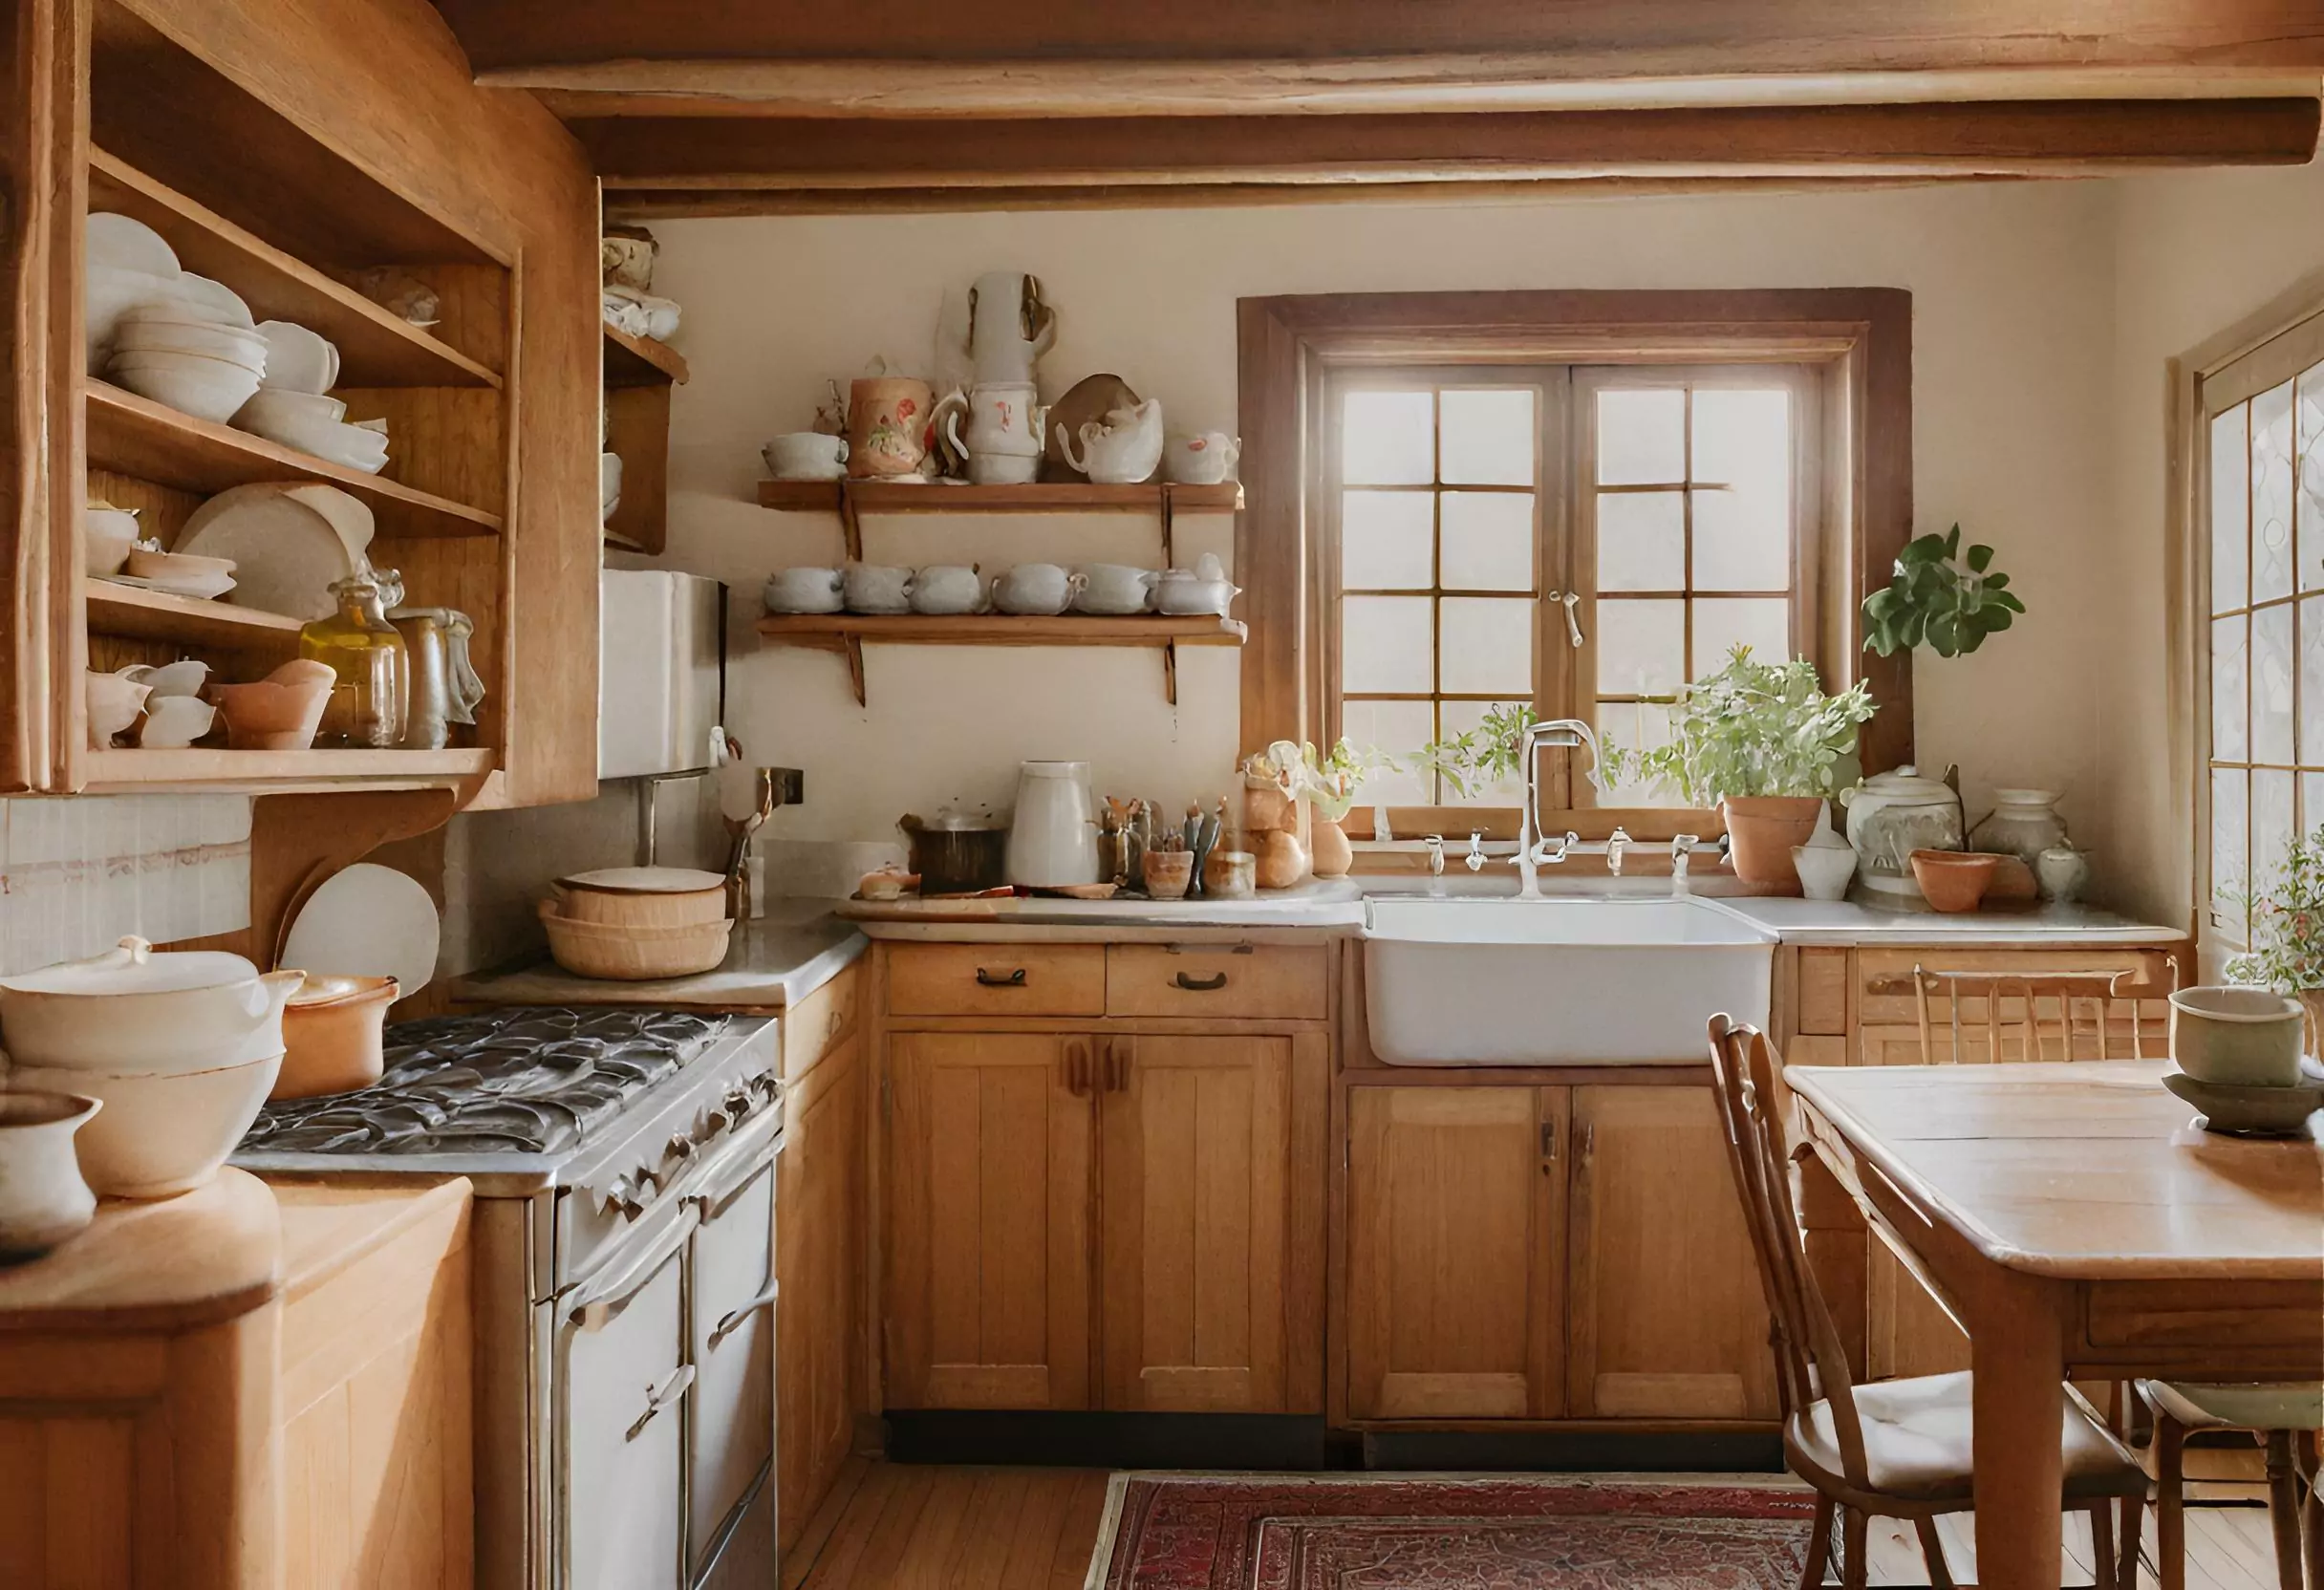 Vintage kitchen with wood accents, exuding old-fashioned elegance for warmth and character.